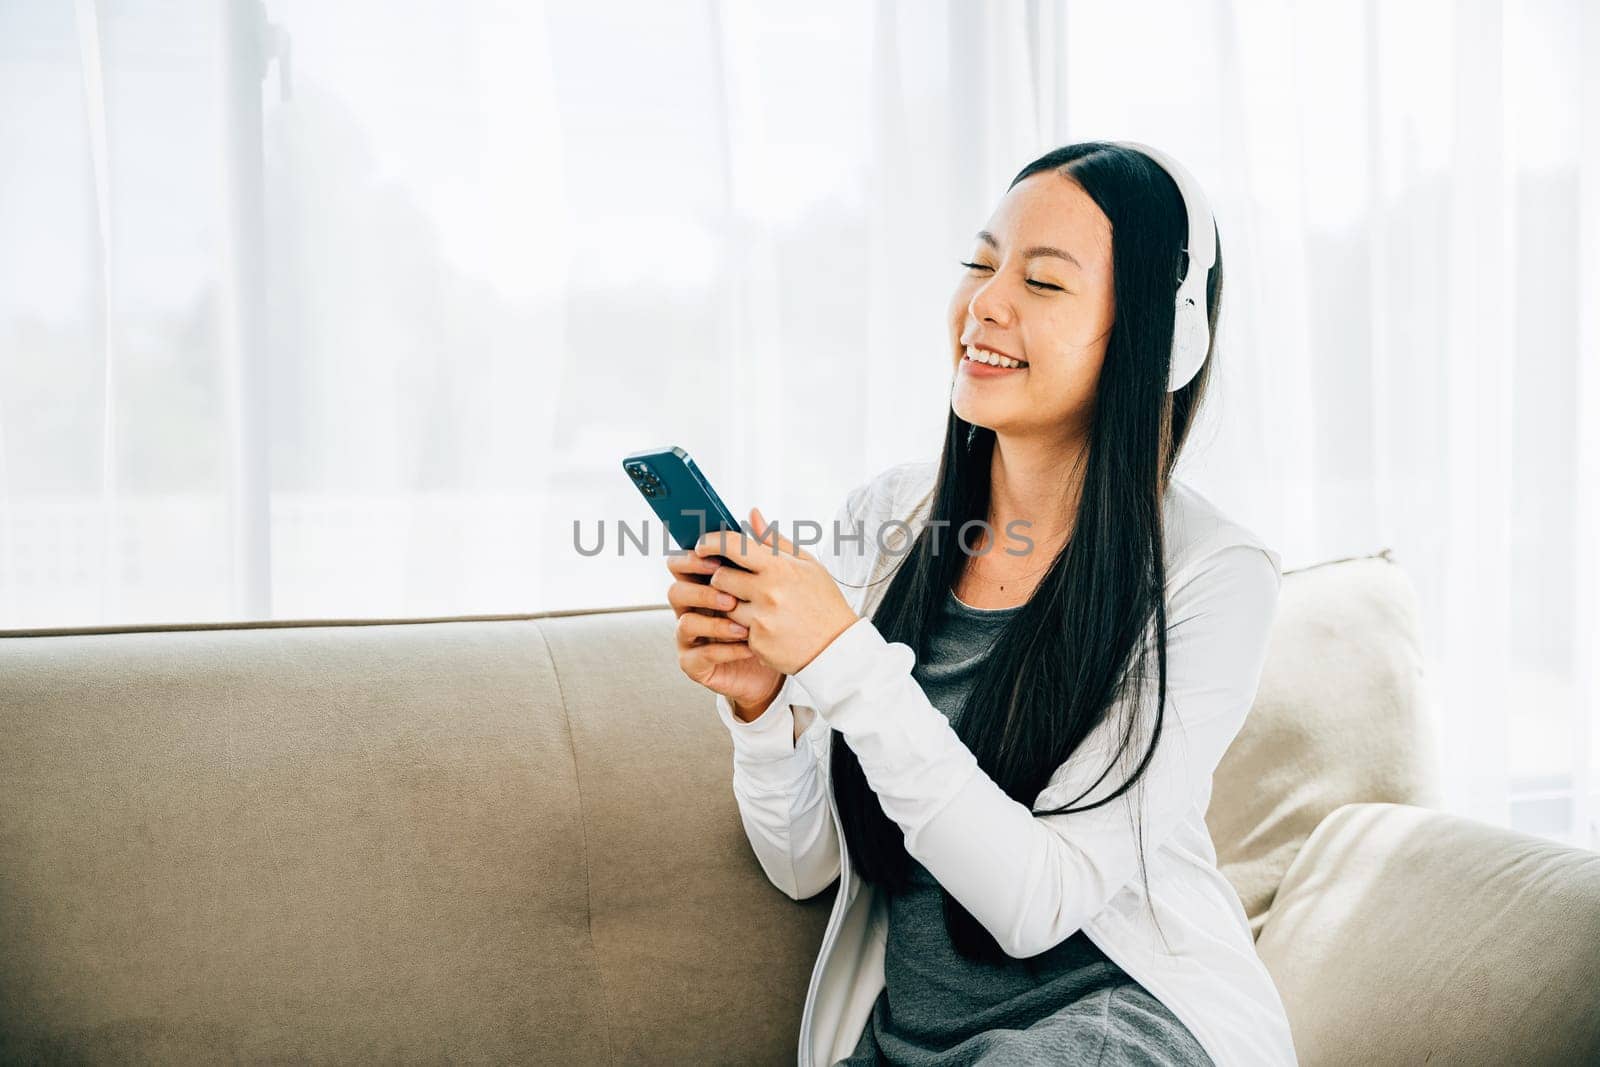 Woman with smartphone and headphones relaxes on sofa listens to music by Sorapop